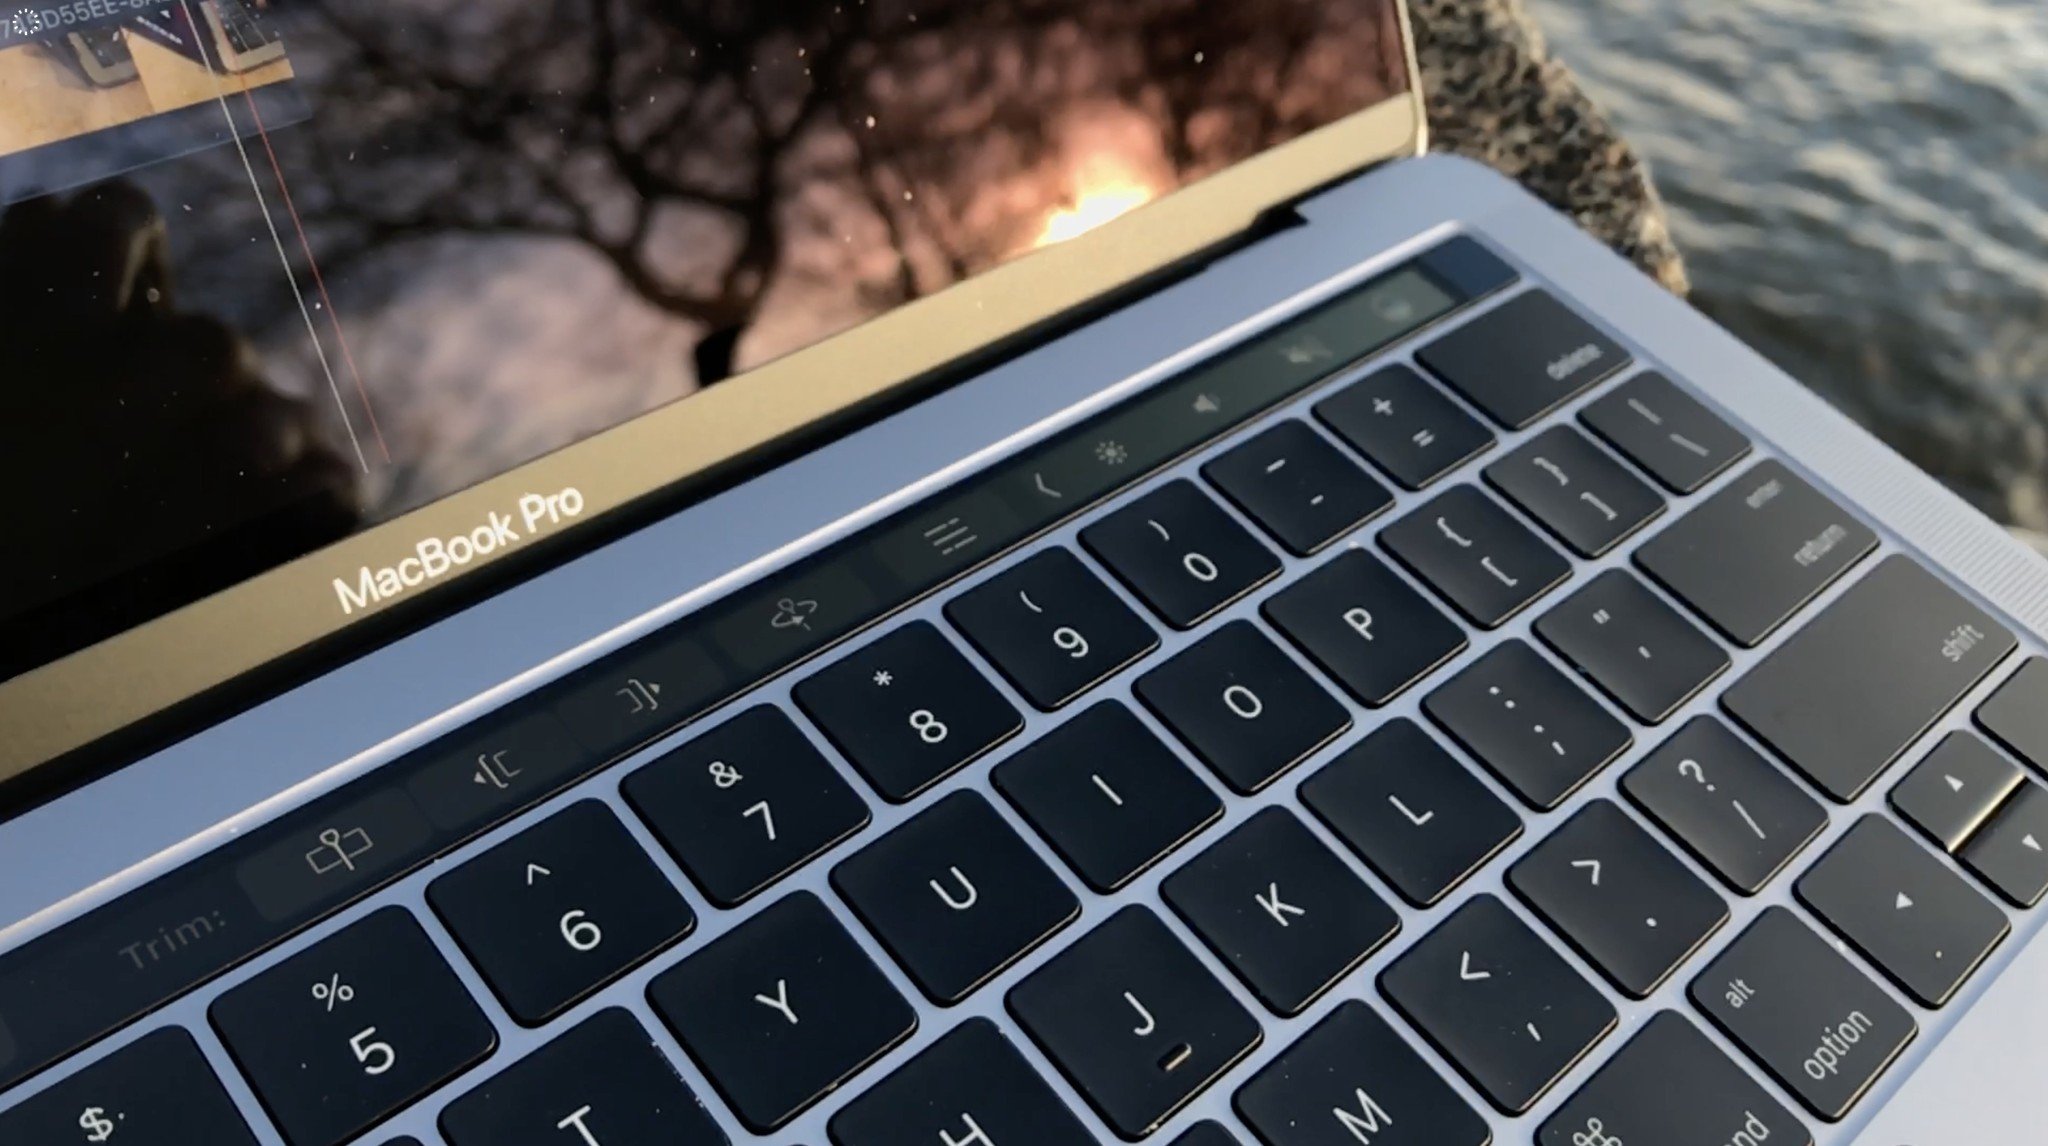 The Touch Bar on the MacBook Pro